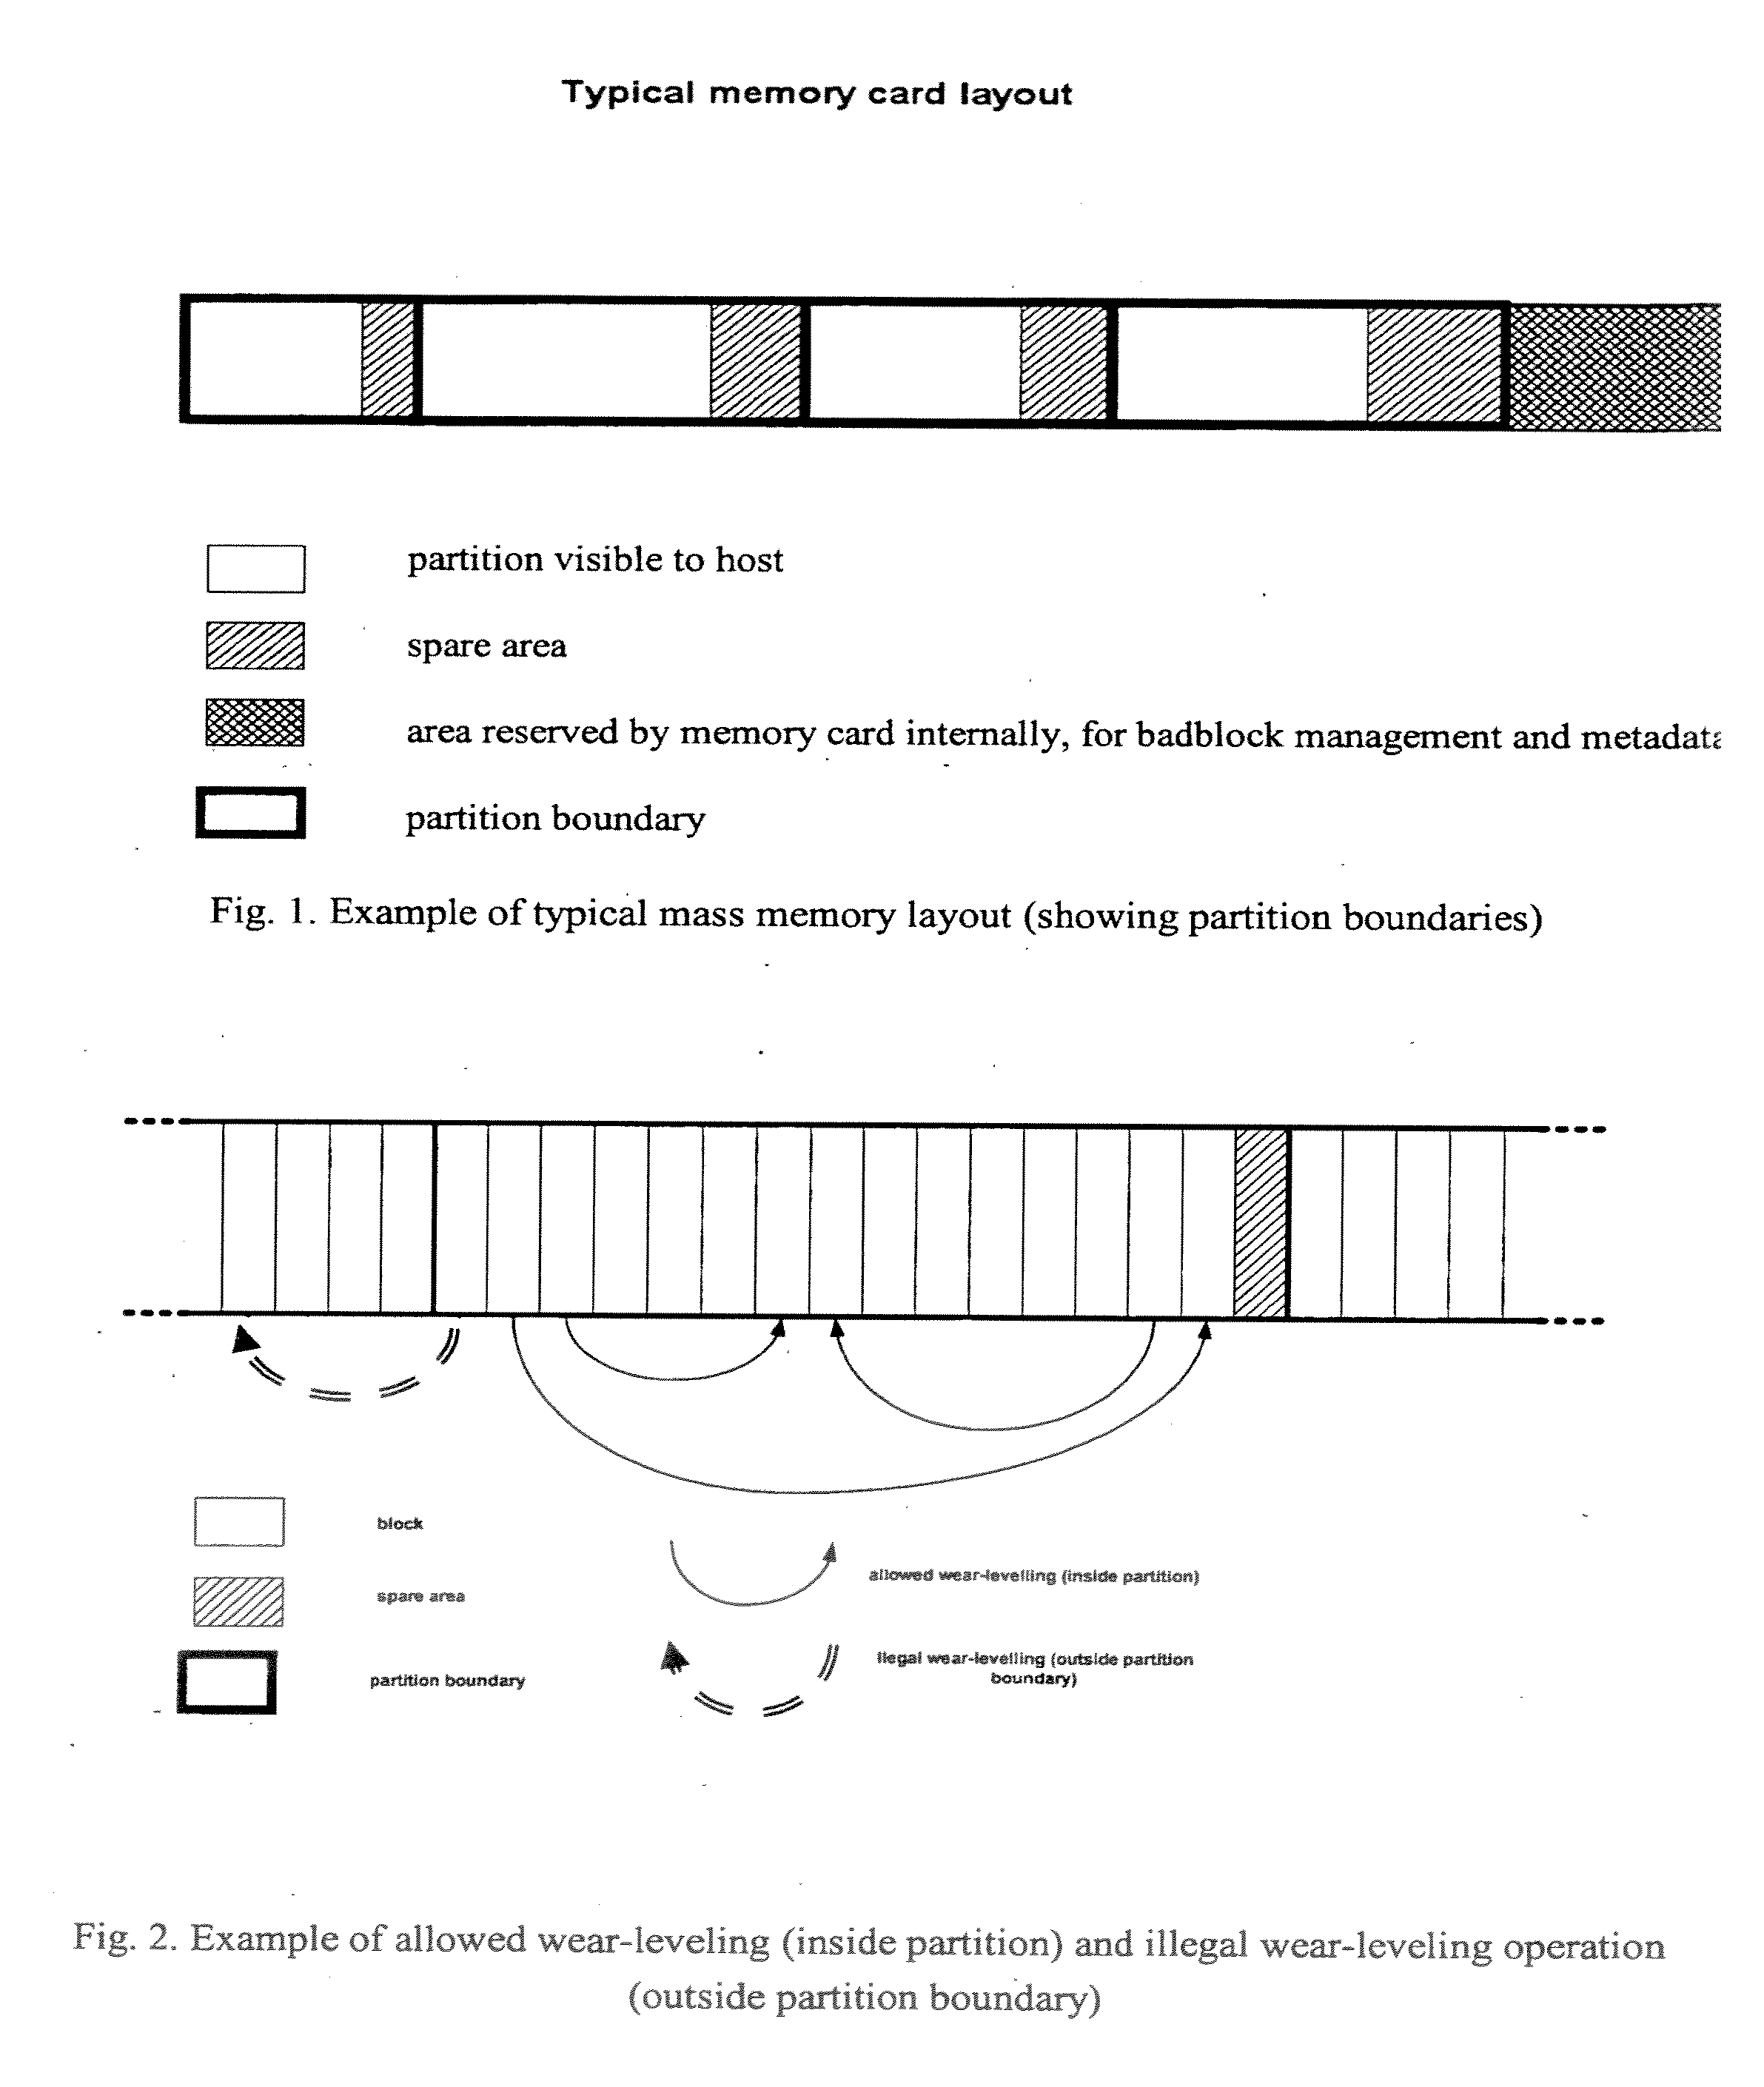 Method For Utilizing A Memory Interface To Control Partitioning Of A Memory Module